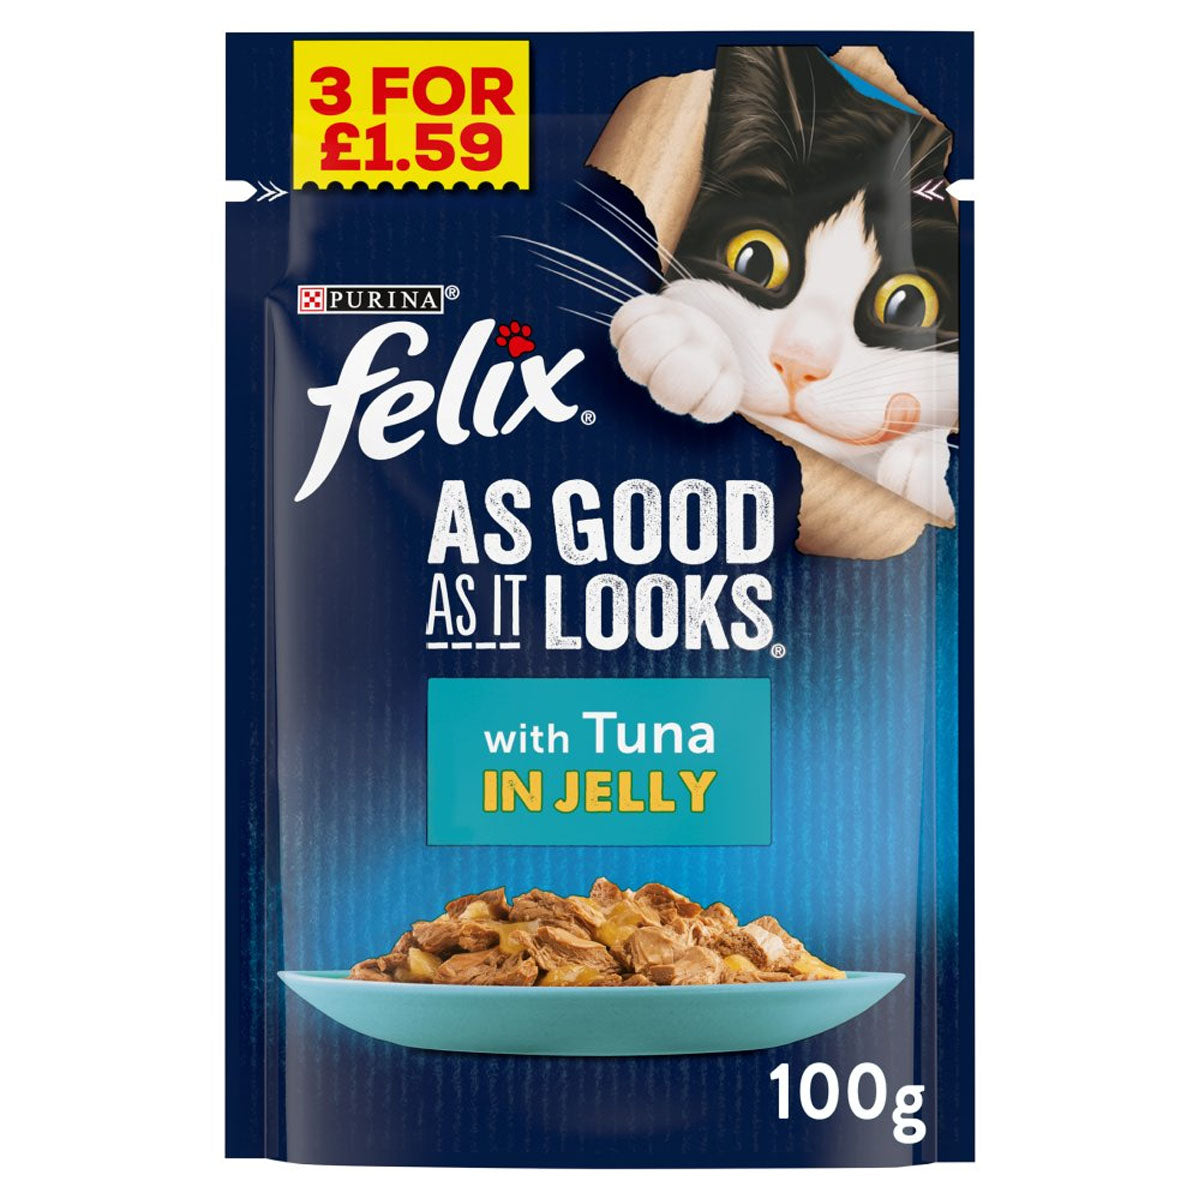 Felix - As Good As It Looks with Tuna in Jelly - 100g - Continental Food Store